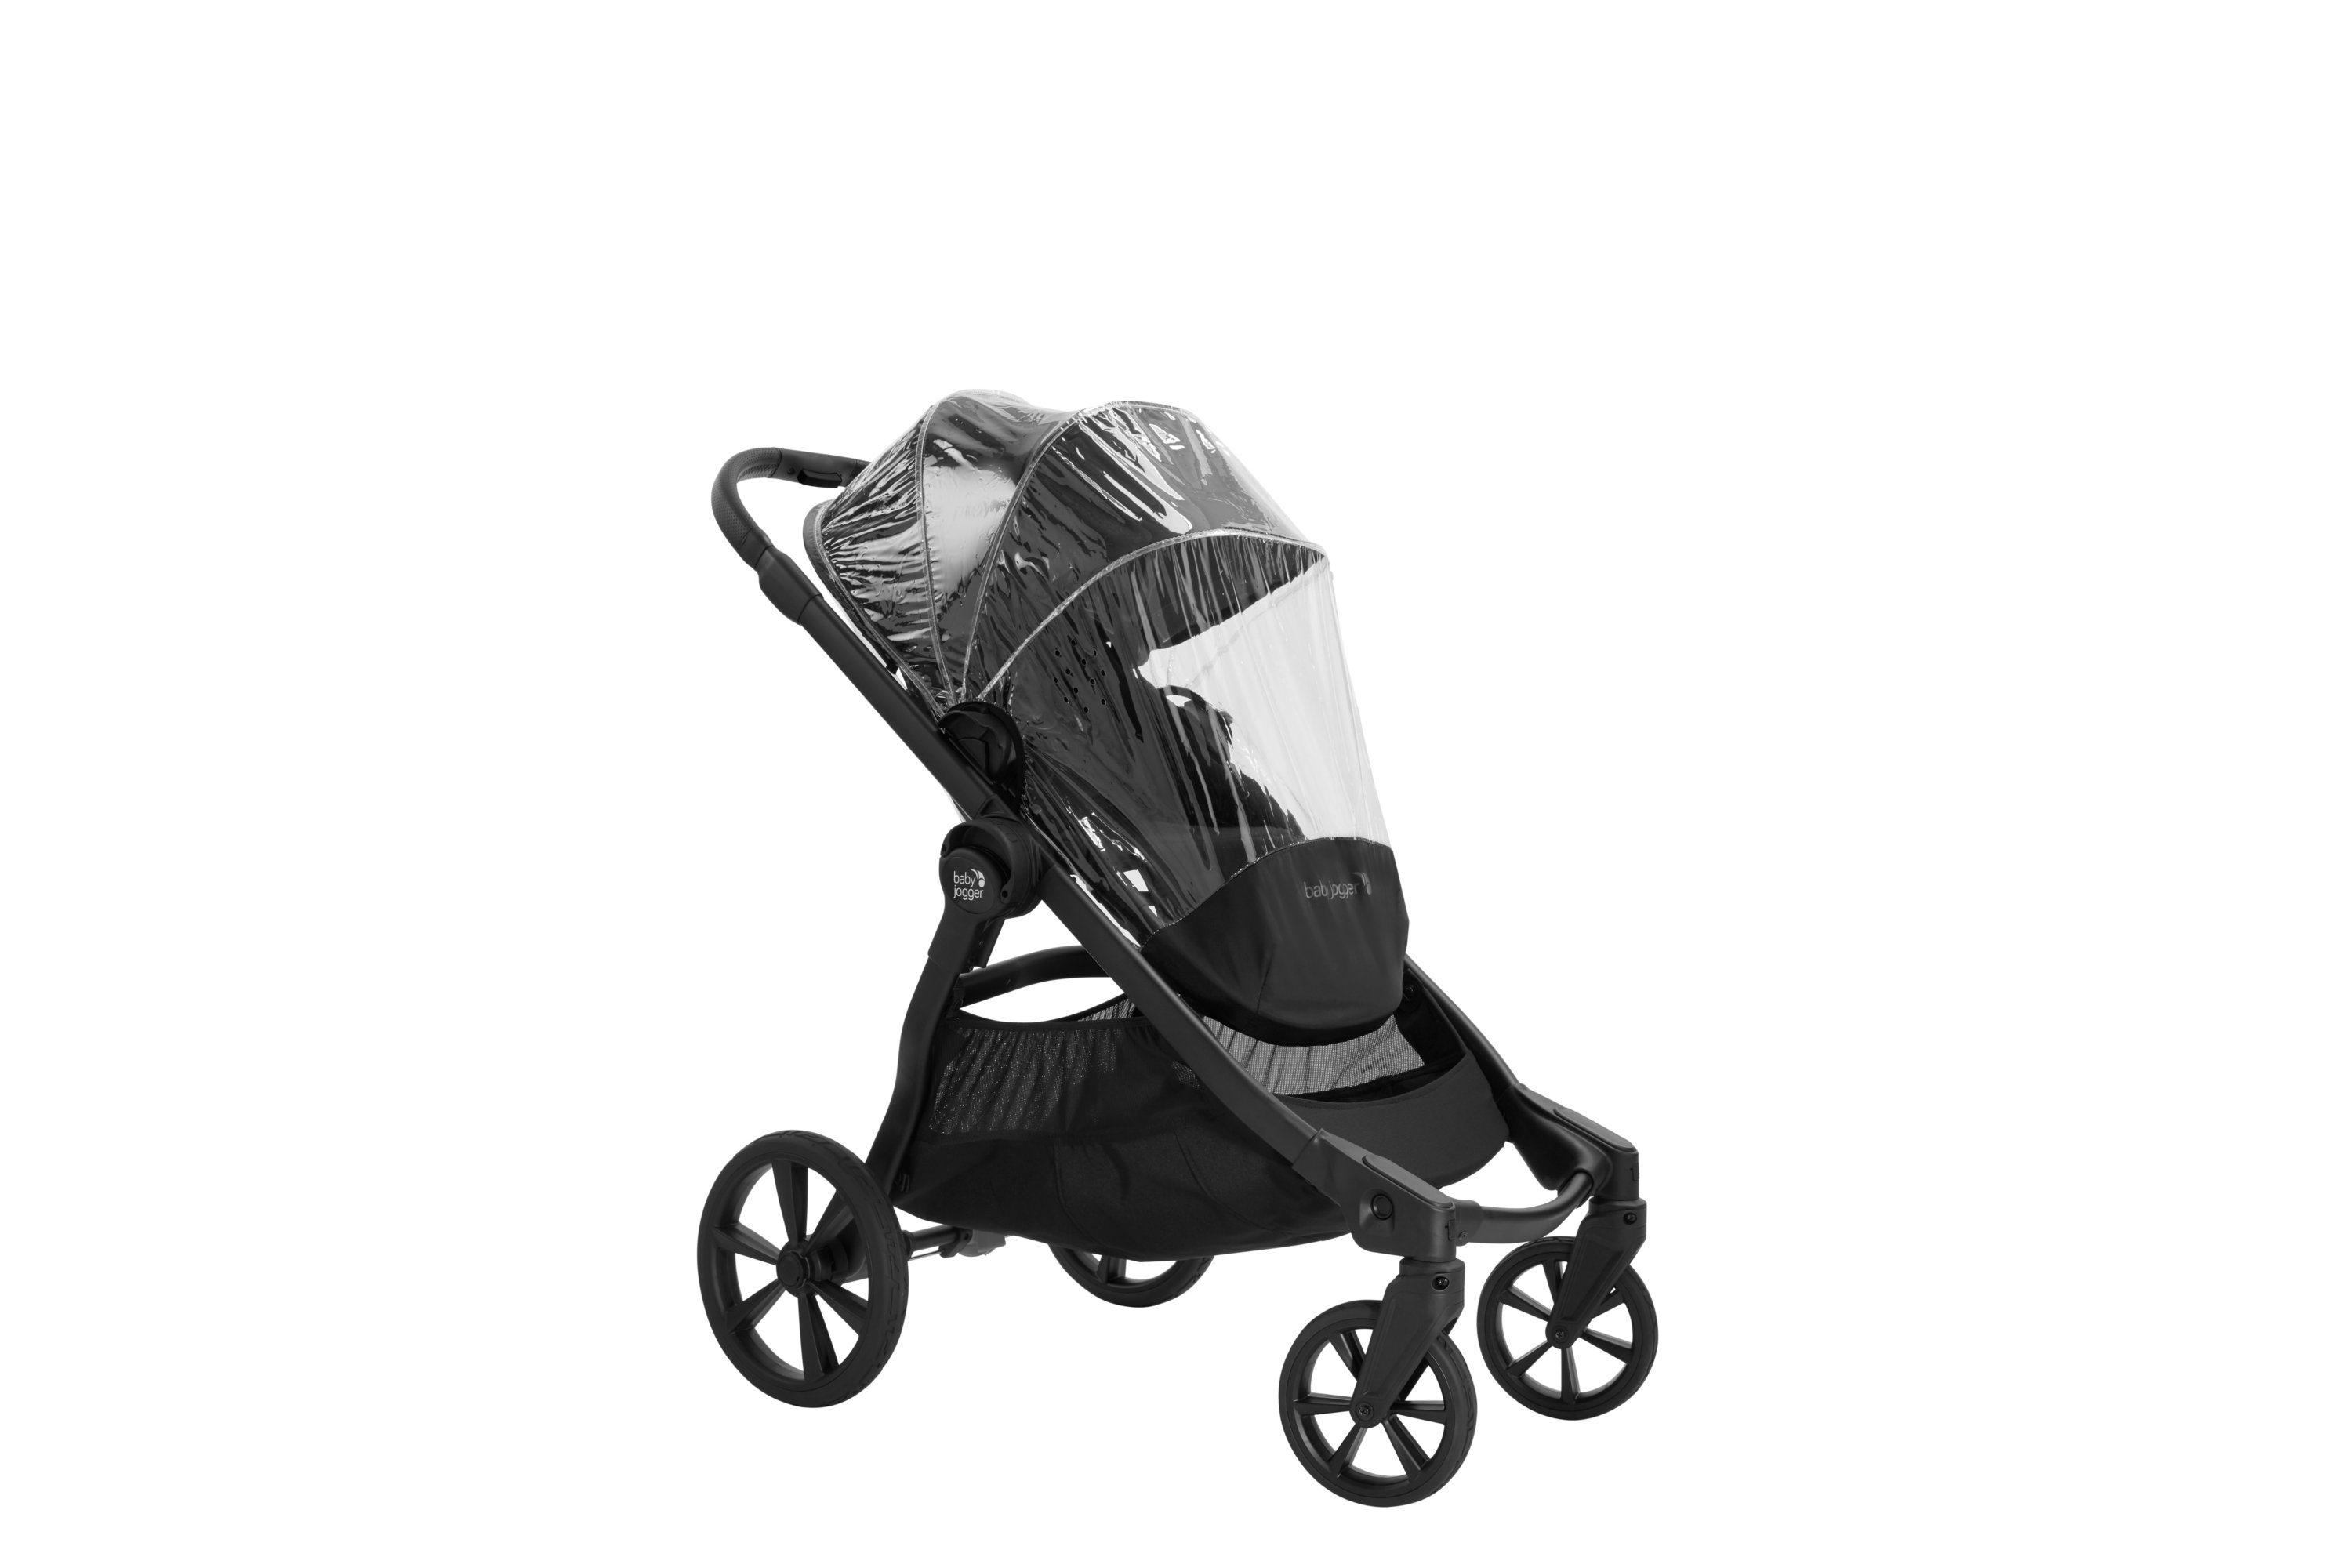 Baby Jogger City Select New Free Shipping! LUX Rain Cover 